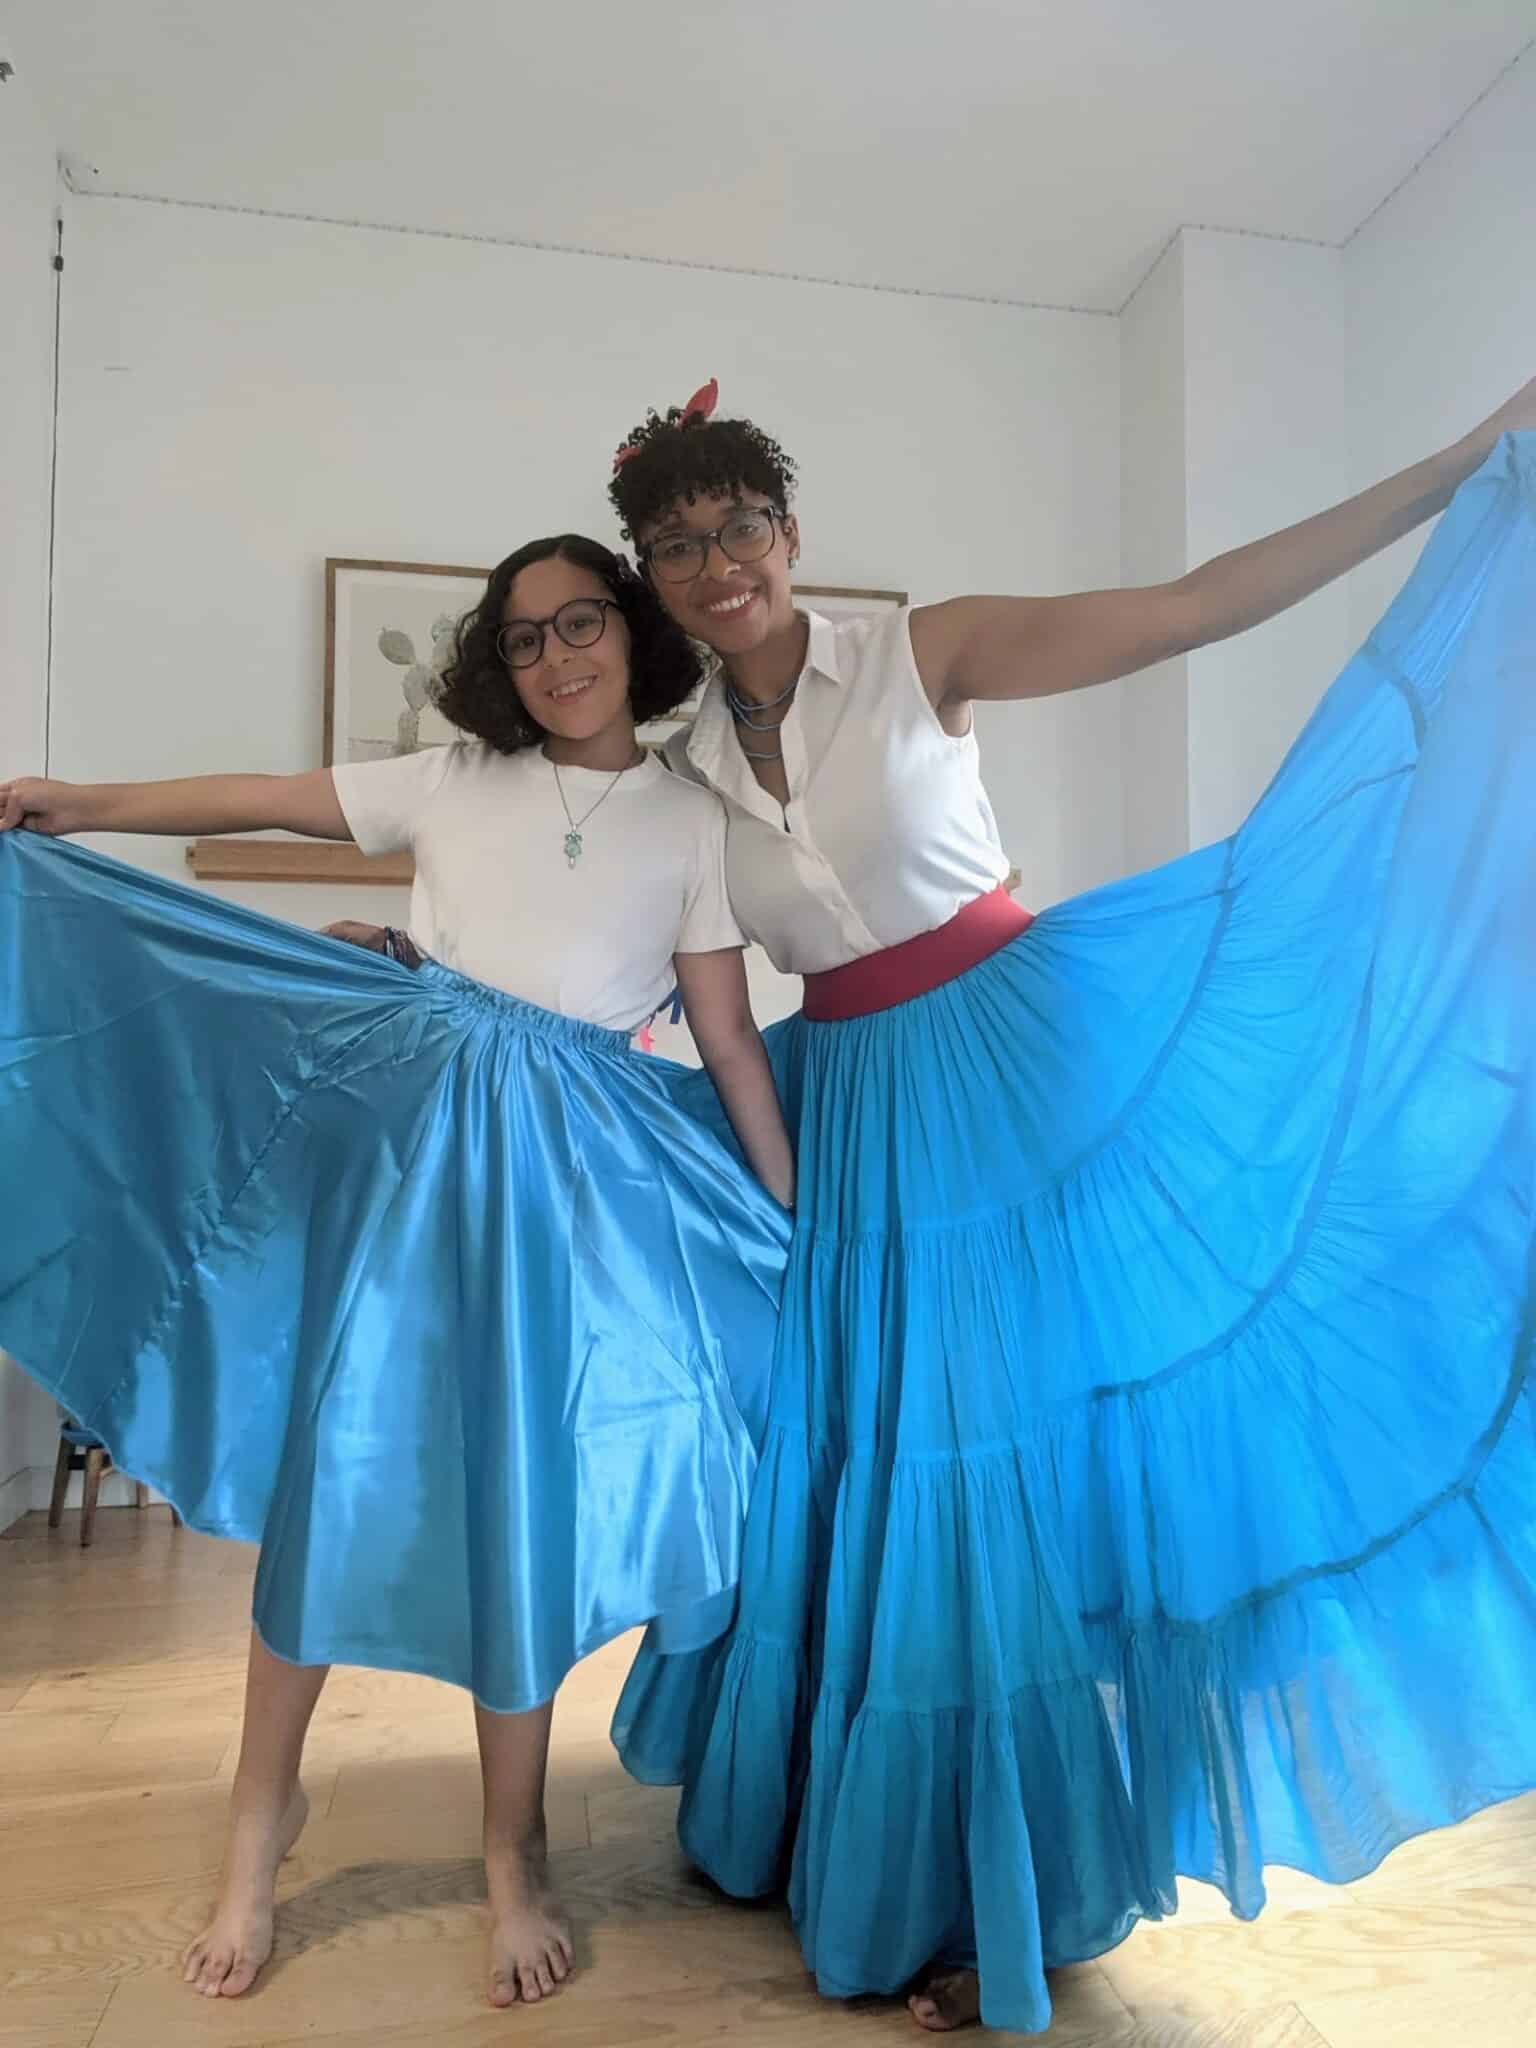 Photos of women posing with blue skirts